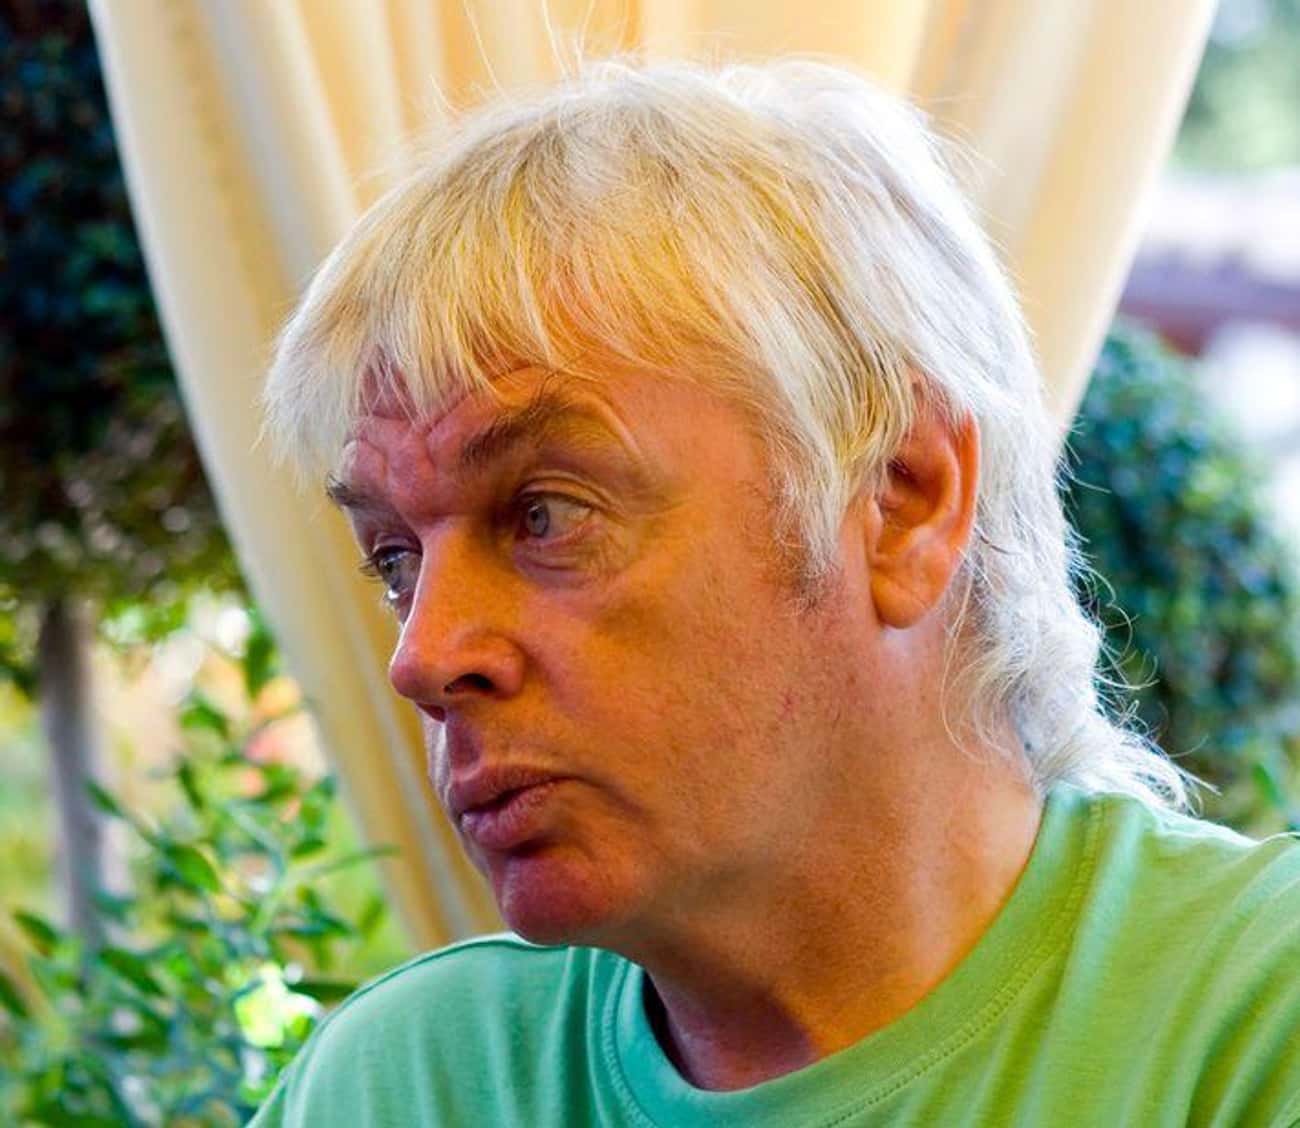 David Icke Popularized The Lizard People Theory And Believes That They Created The Human Race